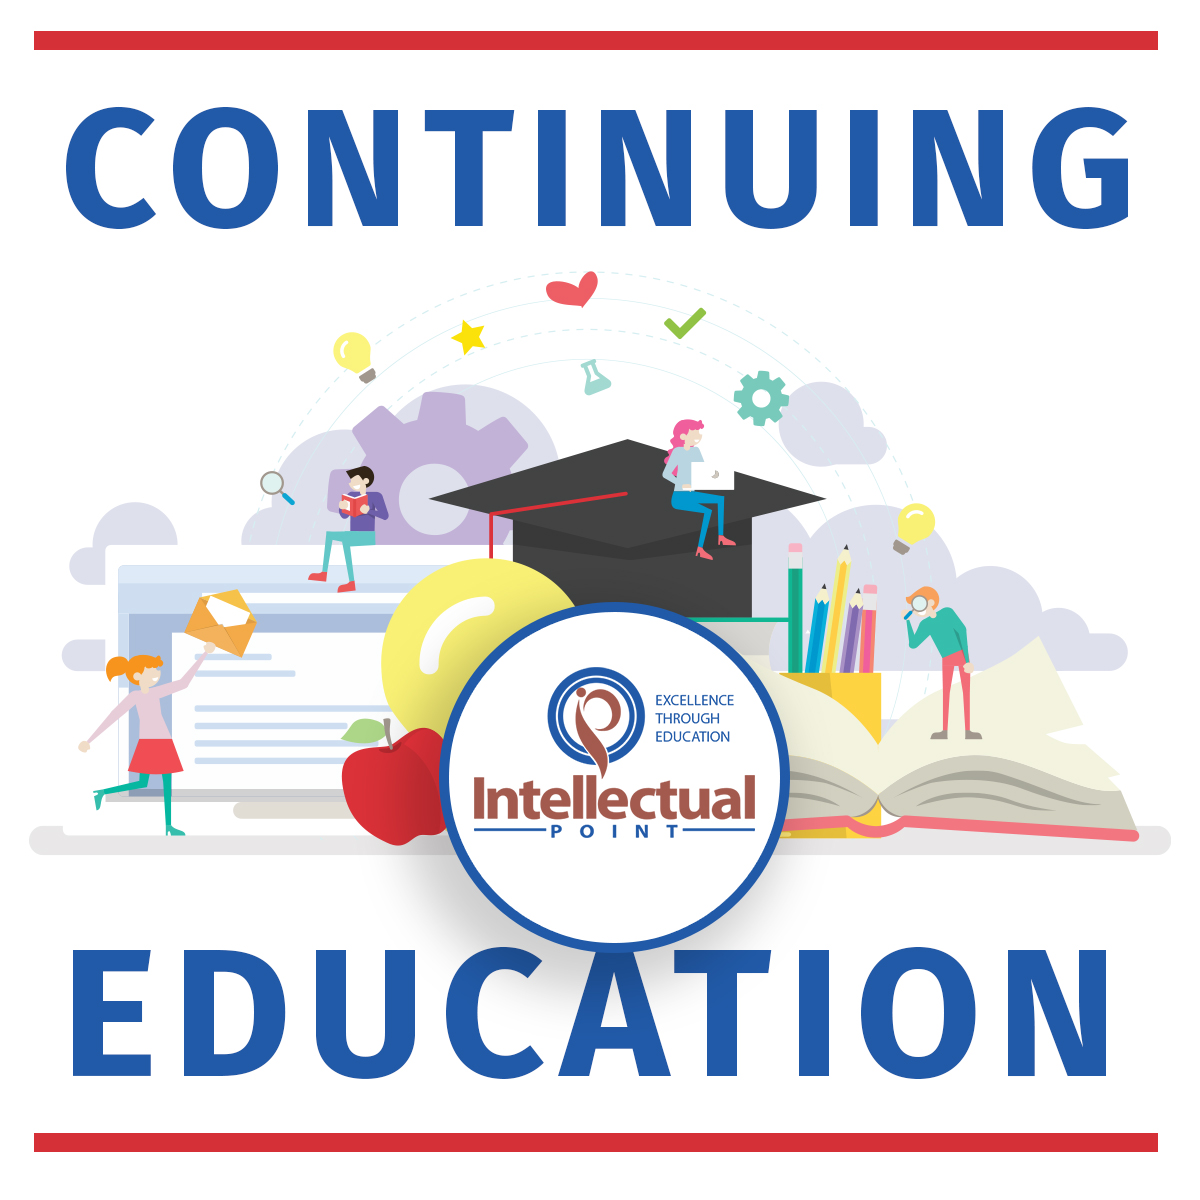 continuing education meaning